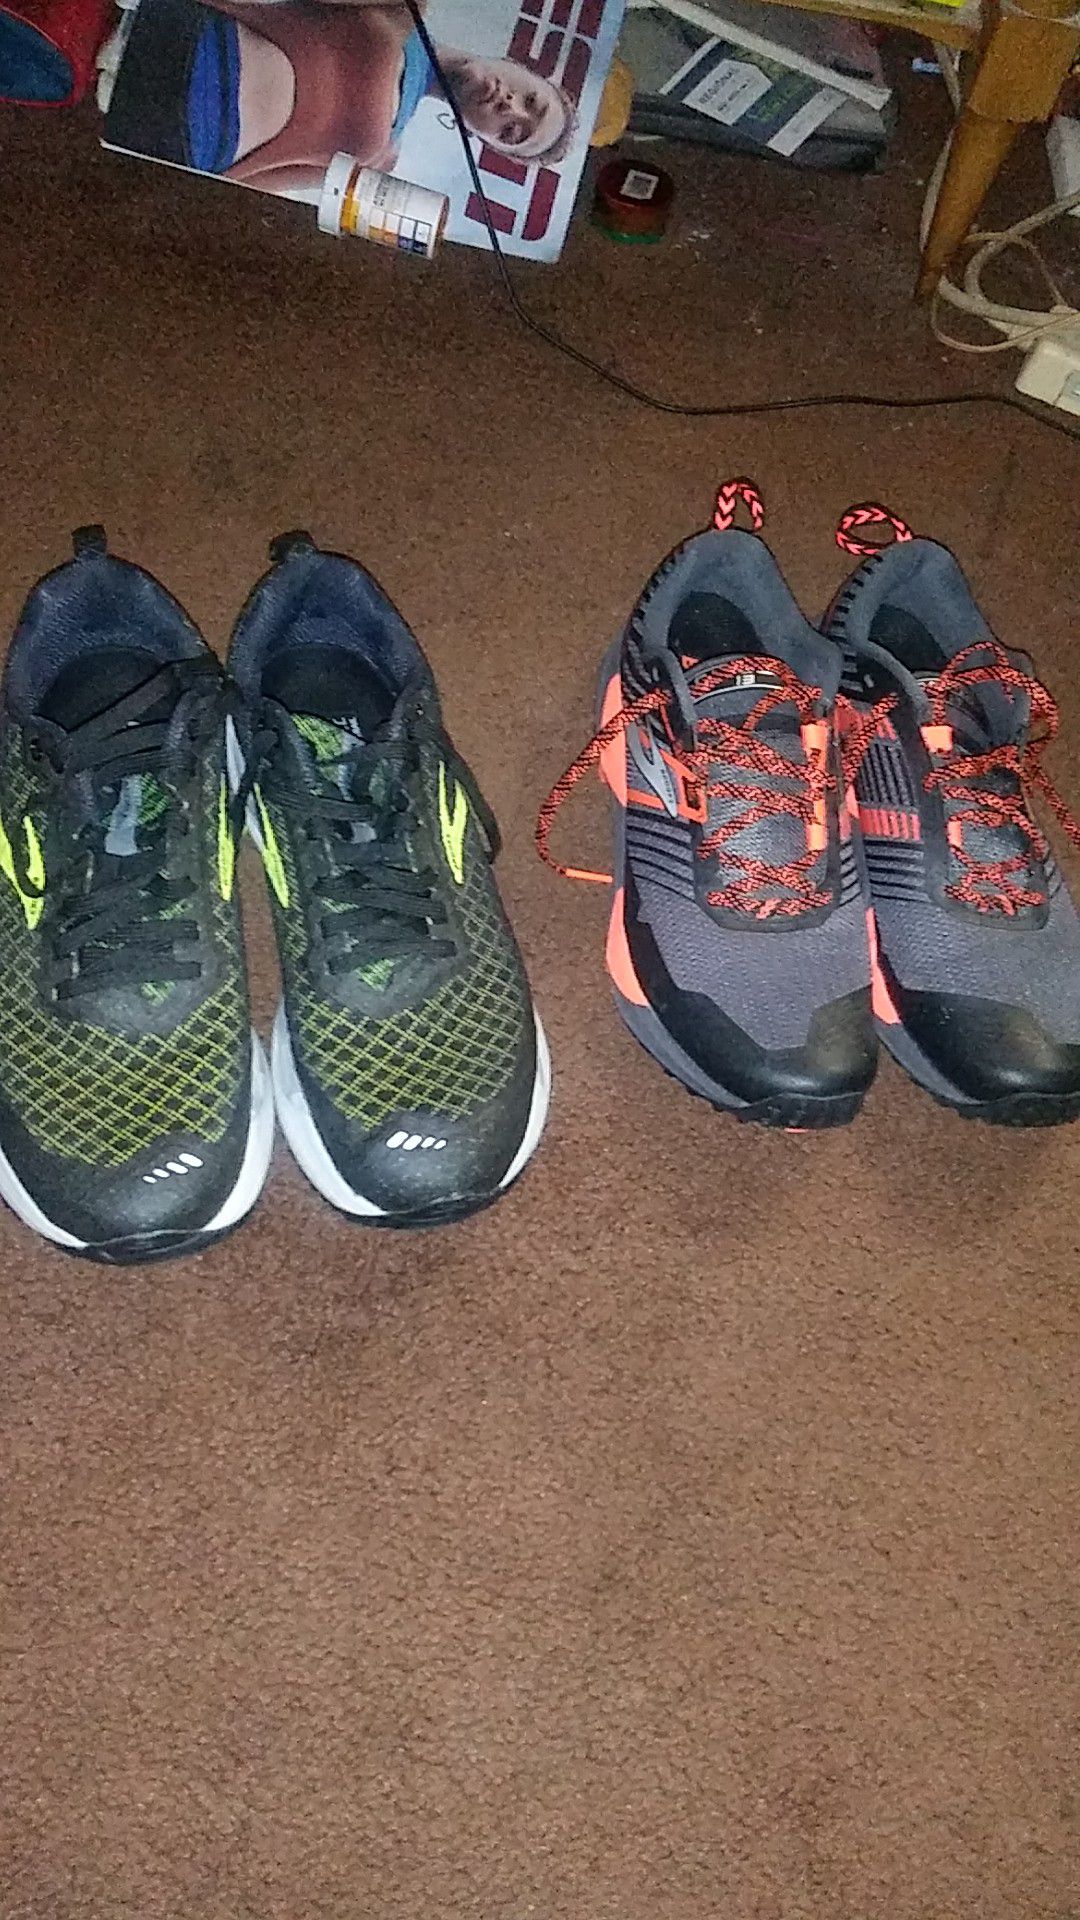 Brooks great walking shoes very comfortable size 11 and 11half